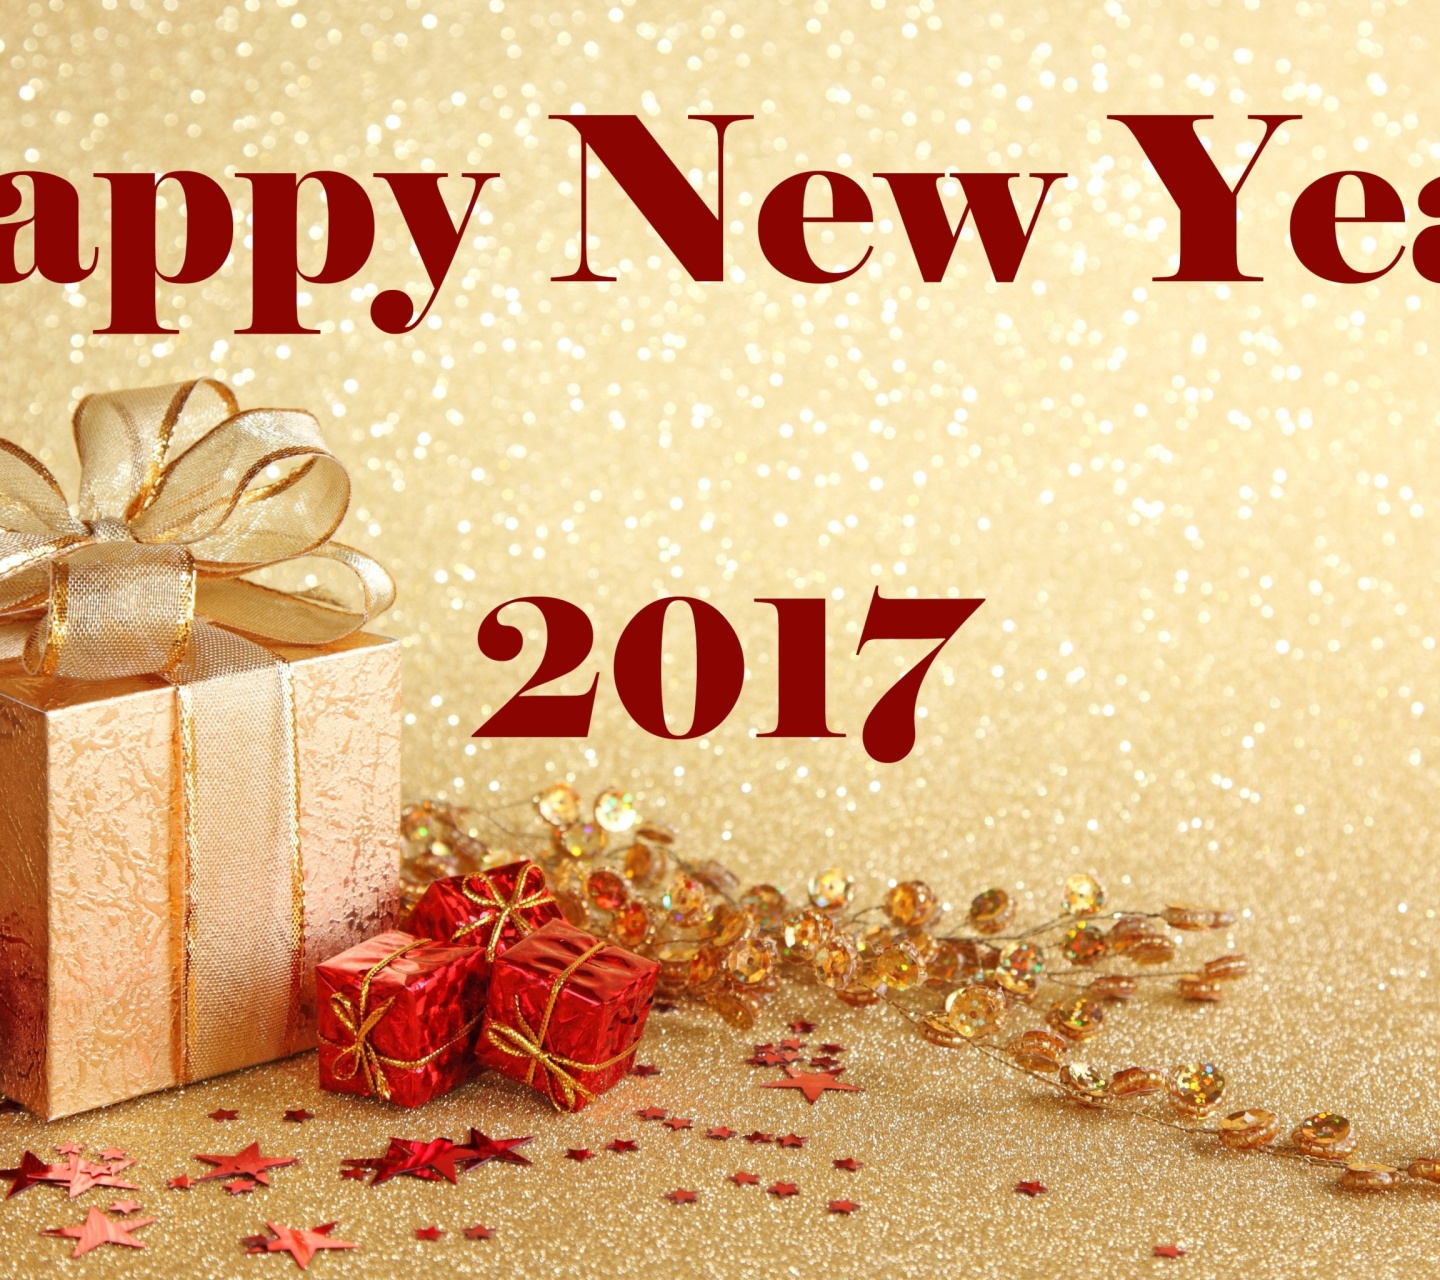 Happy New Year 2017 with Gifts wallpaper 1440x1280